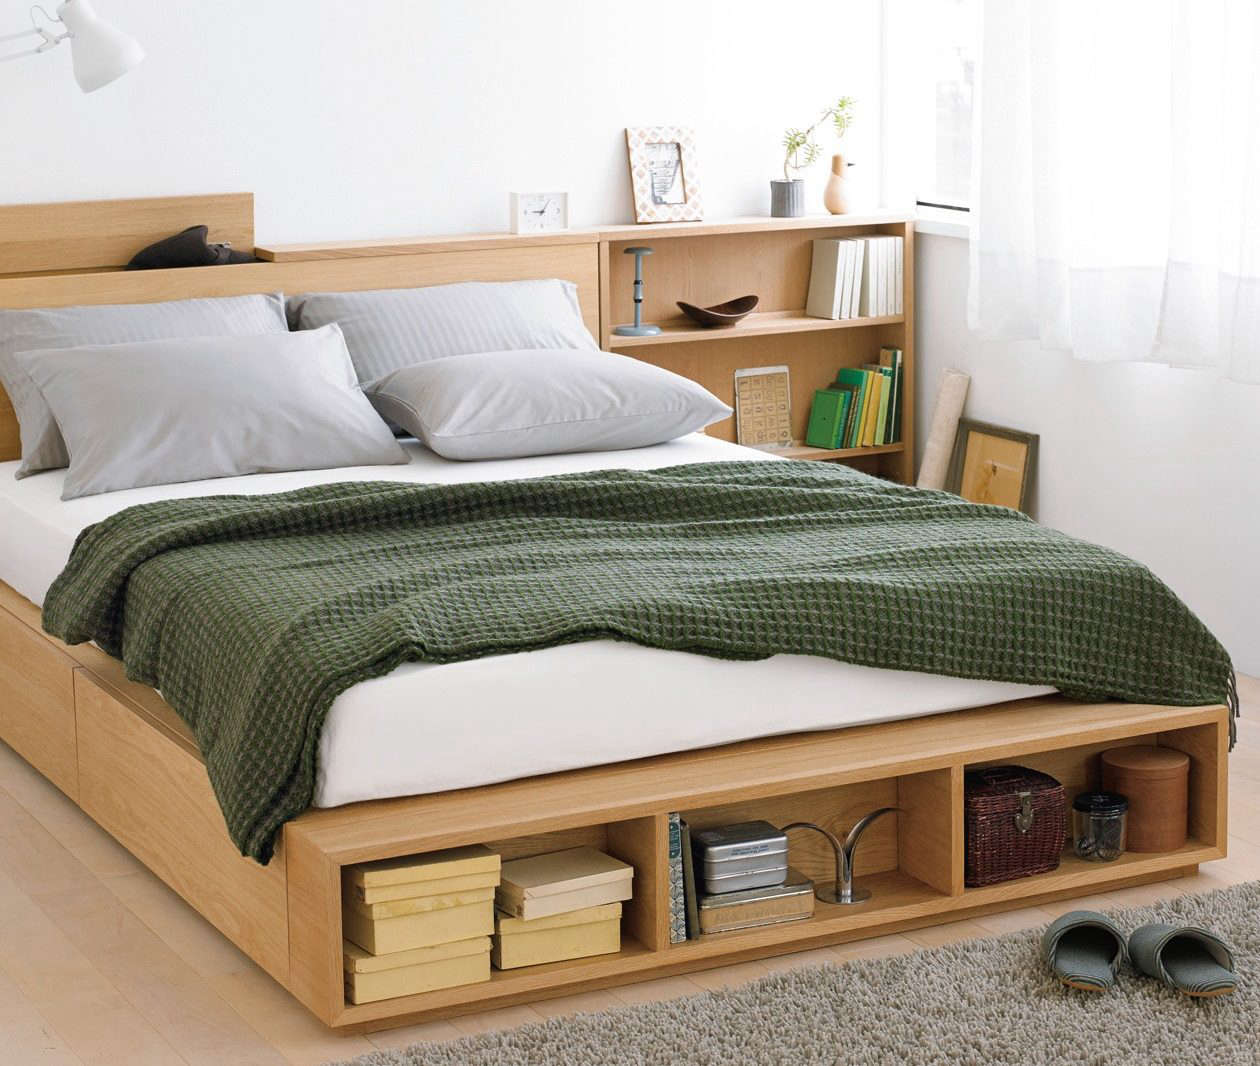 10 Easy Pieces Storage Beds Remodelista, Double Bed Frame With Storage